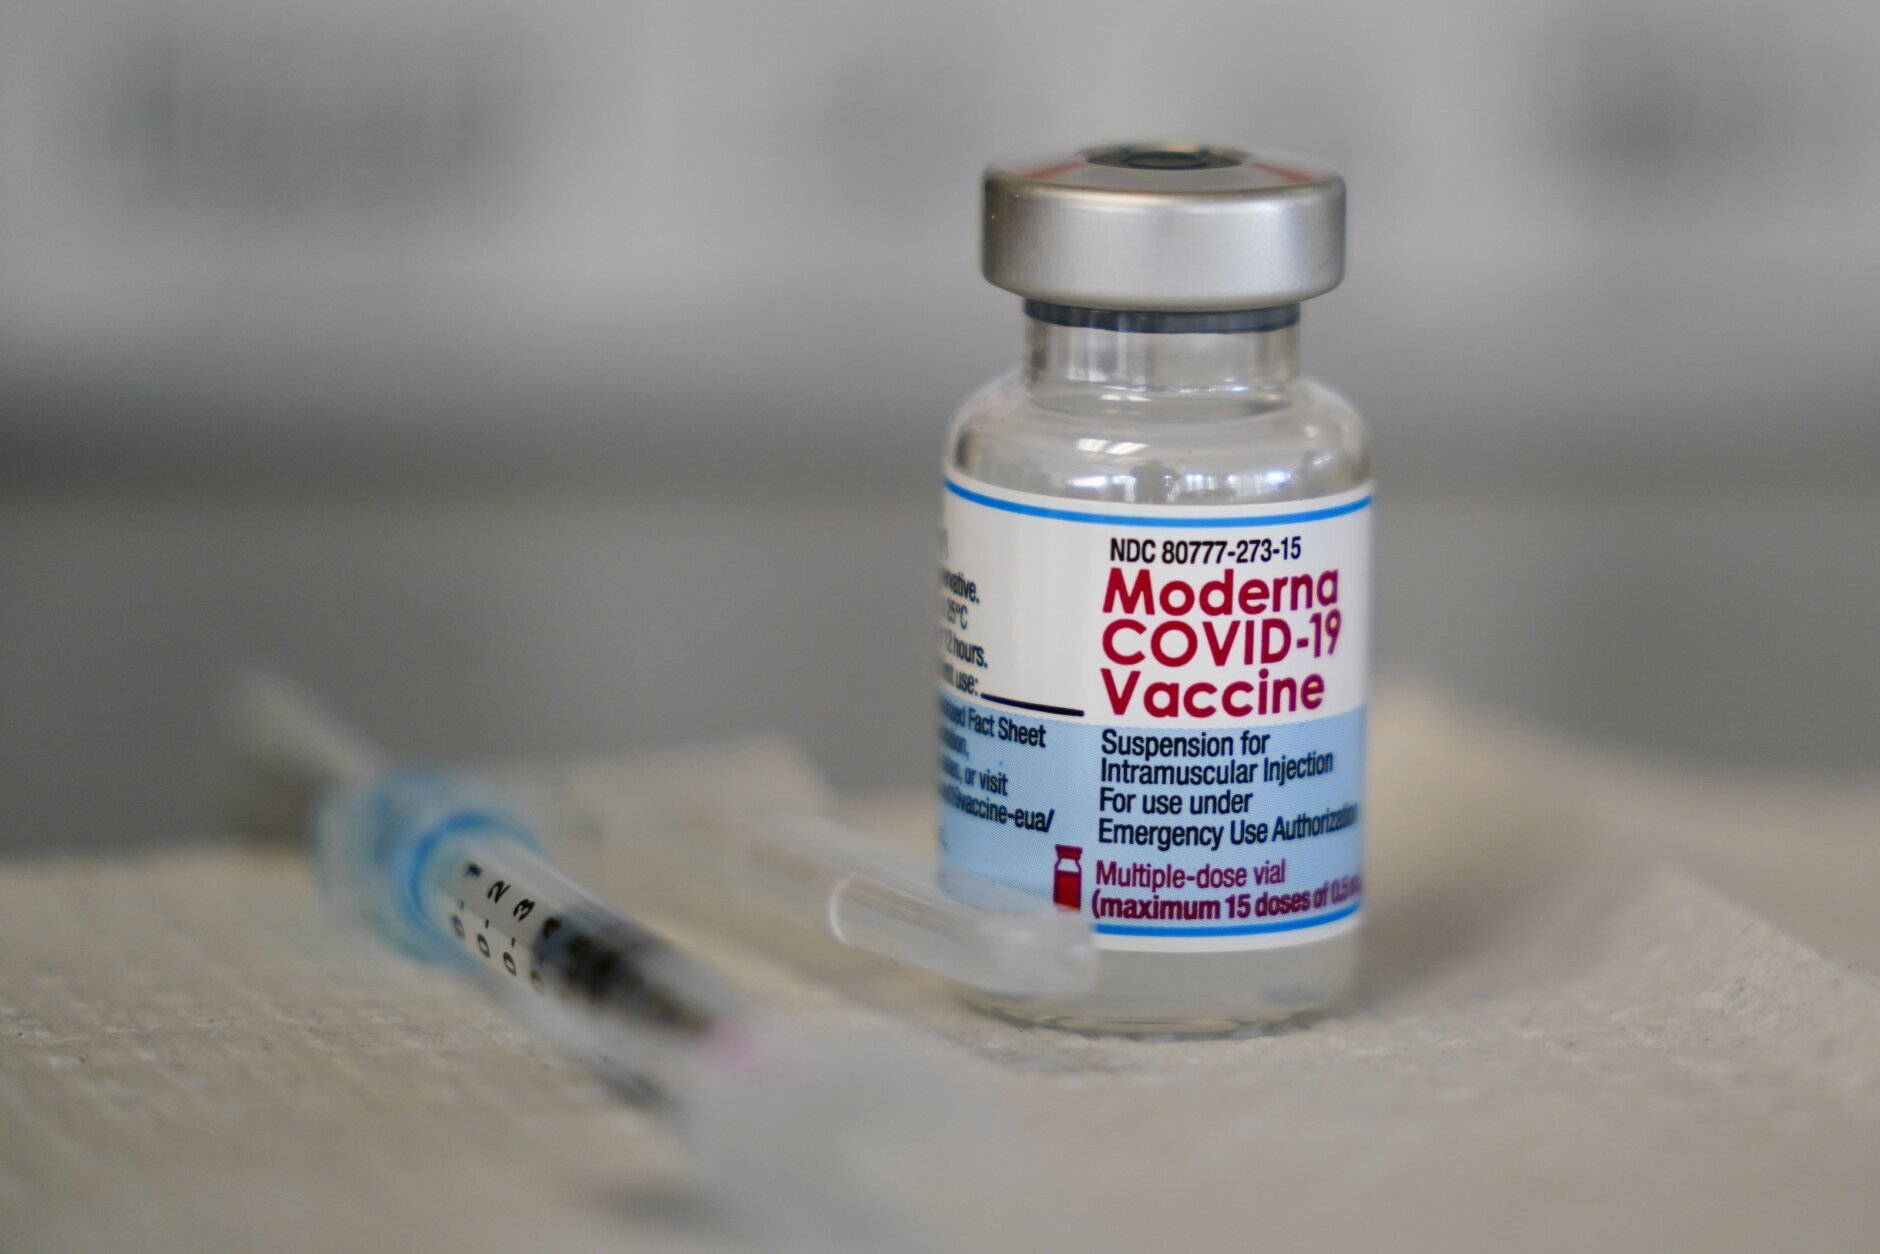 <p><strong>Vaccinations</strong></p>
<p>While the first COVID-19 vaccinations rolled out in December 2020, tens of millions of doses were administered in 2021, with pandemic-weary Americans hoping for a return to normal life. (The <a href="https://www.ajmc.com/view/a-timeline-of-covid-19-vaccine-developments-in-2021" target="_blank" rel="noopener">American Journal of Managed Care</a> has a comprehensive timeline of the rollout.)</p>
<p>Yet surges of the virus continued, particularly among the unvaccinated, and variants such as delta and omicron left the nation looking at the possibility of more cases, hospitalizations and deaths as another holiday season approached.</p>
<p>An unanticipated problem: The prevalence of misinformation and disinformation, often <a href="https://wtop.com/j-j-green-national/2021/09/covid-conspiracy-foreign-disinformation-driving-american-vaccine-resistance/" target="_blank" rel="noopener">foreign in origin</a>, about vaccines. Such disinformation has become <a href="https://wtop.com/education/2021/10/anti-vaccine-chiropractors-rising-force-of-misinformation-2/" target="_blank" rel="noopener">big business</a> for <a href="https://wtop.com/coronavirus/2021/12/how-a-kennedy-built-an-anti-vaccine-juggernaut-amid-covid-19/" target="_blank" rel="noopener">some of its purveyors</a>.</p>
